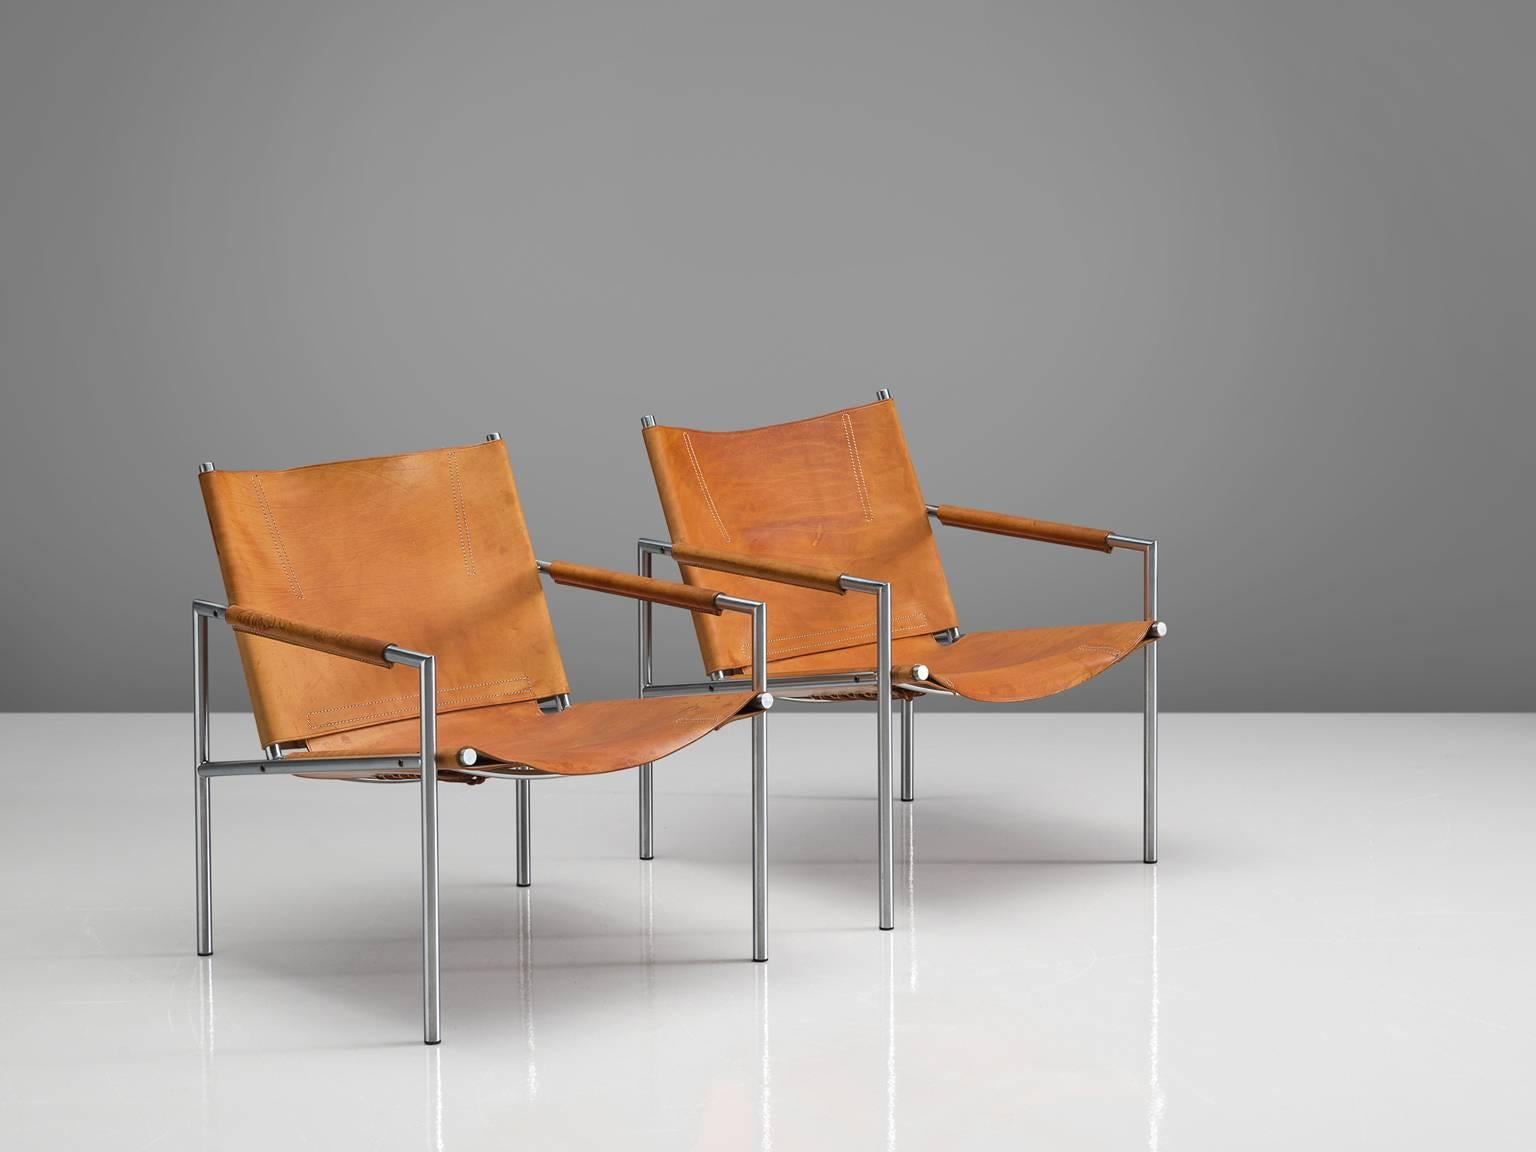 Martin Visser for 't Spectrum, set of armchairs, in steel and cognac leather, Netherlands, 1965. 

These modern, minimalist easy chairs are made of a tubular brushed steel in combination with soft, patinated high-quality cognac leather upholstery.